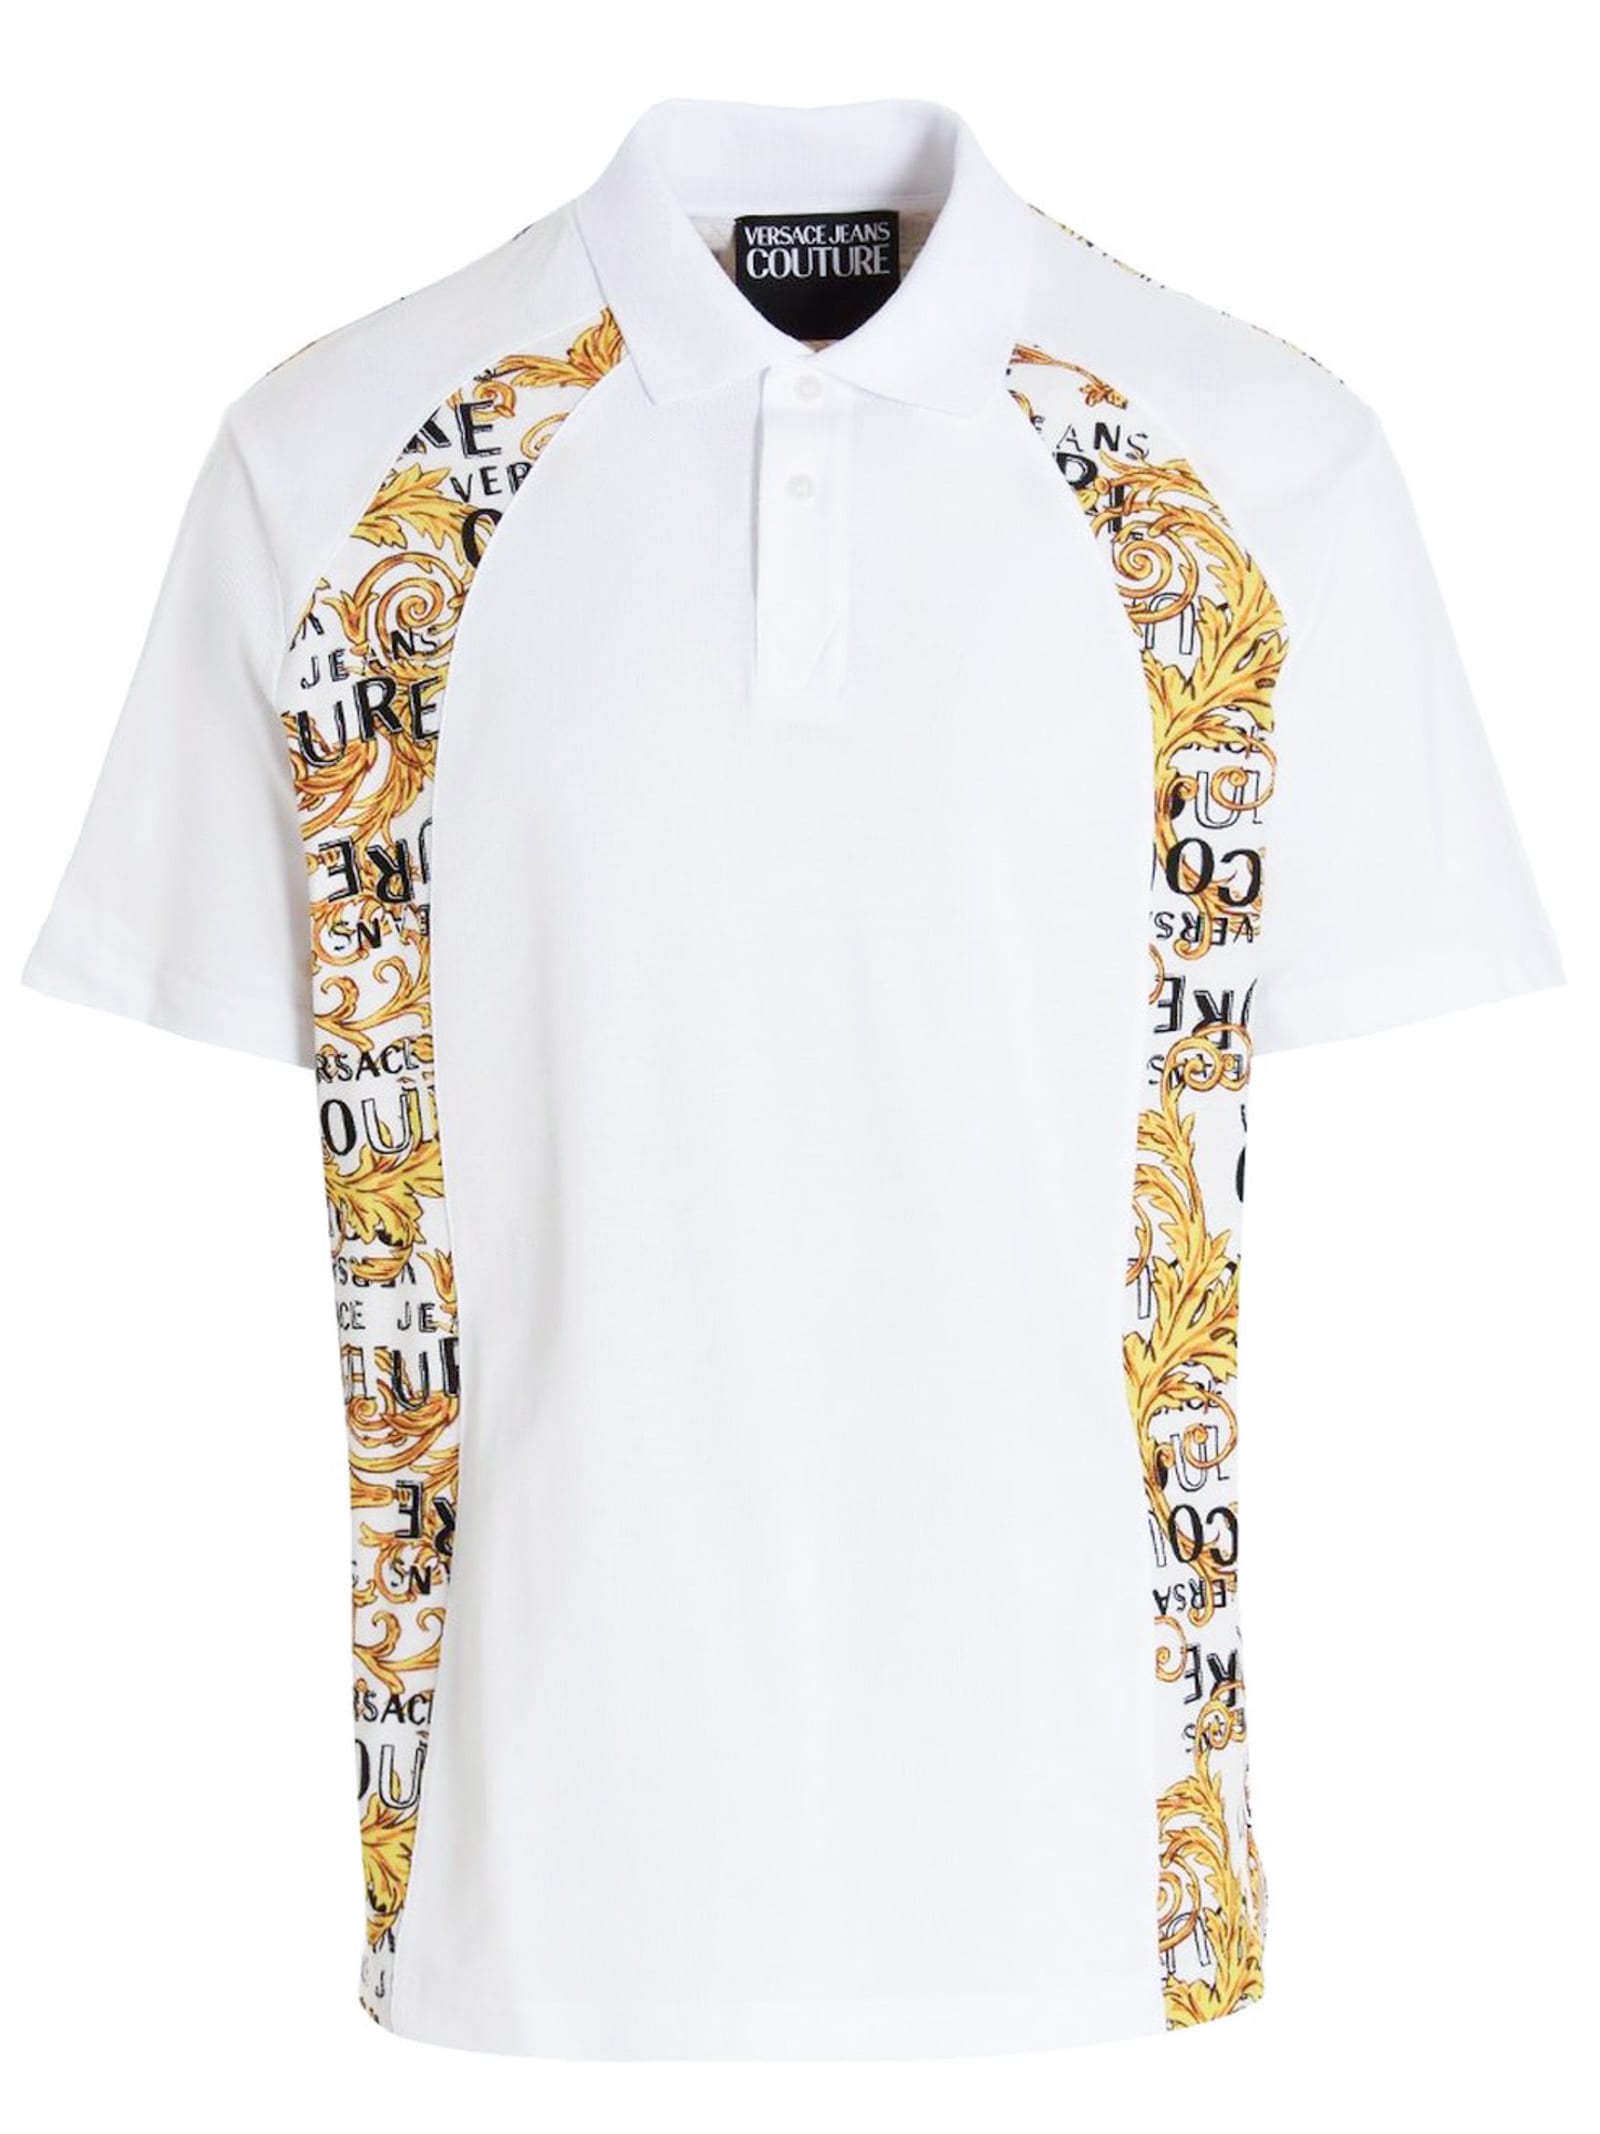 VERSACE JEANS COUTURE WHITE COTTON POLO SHIRT